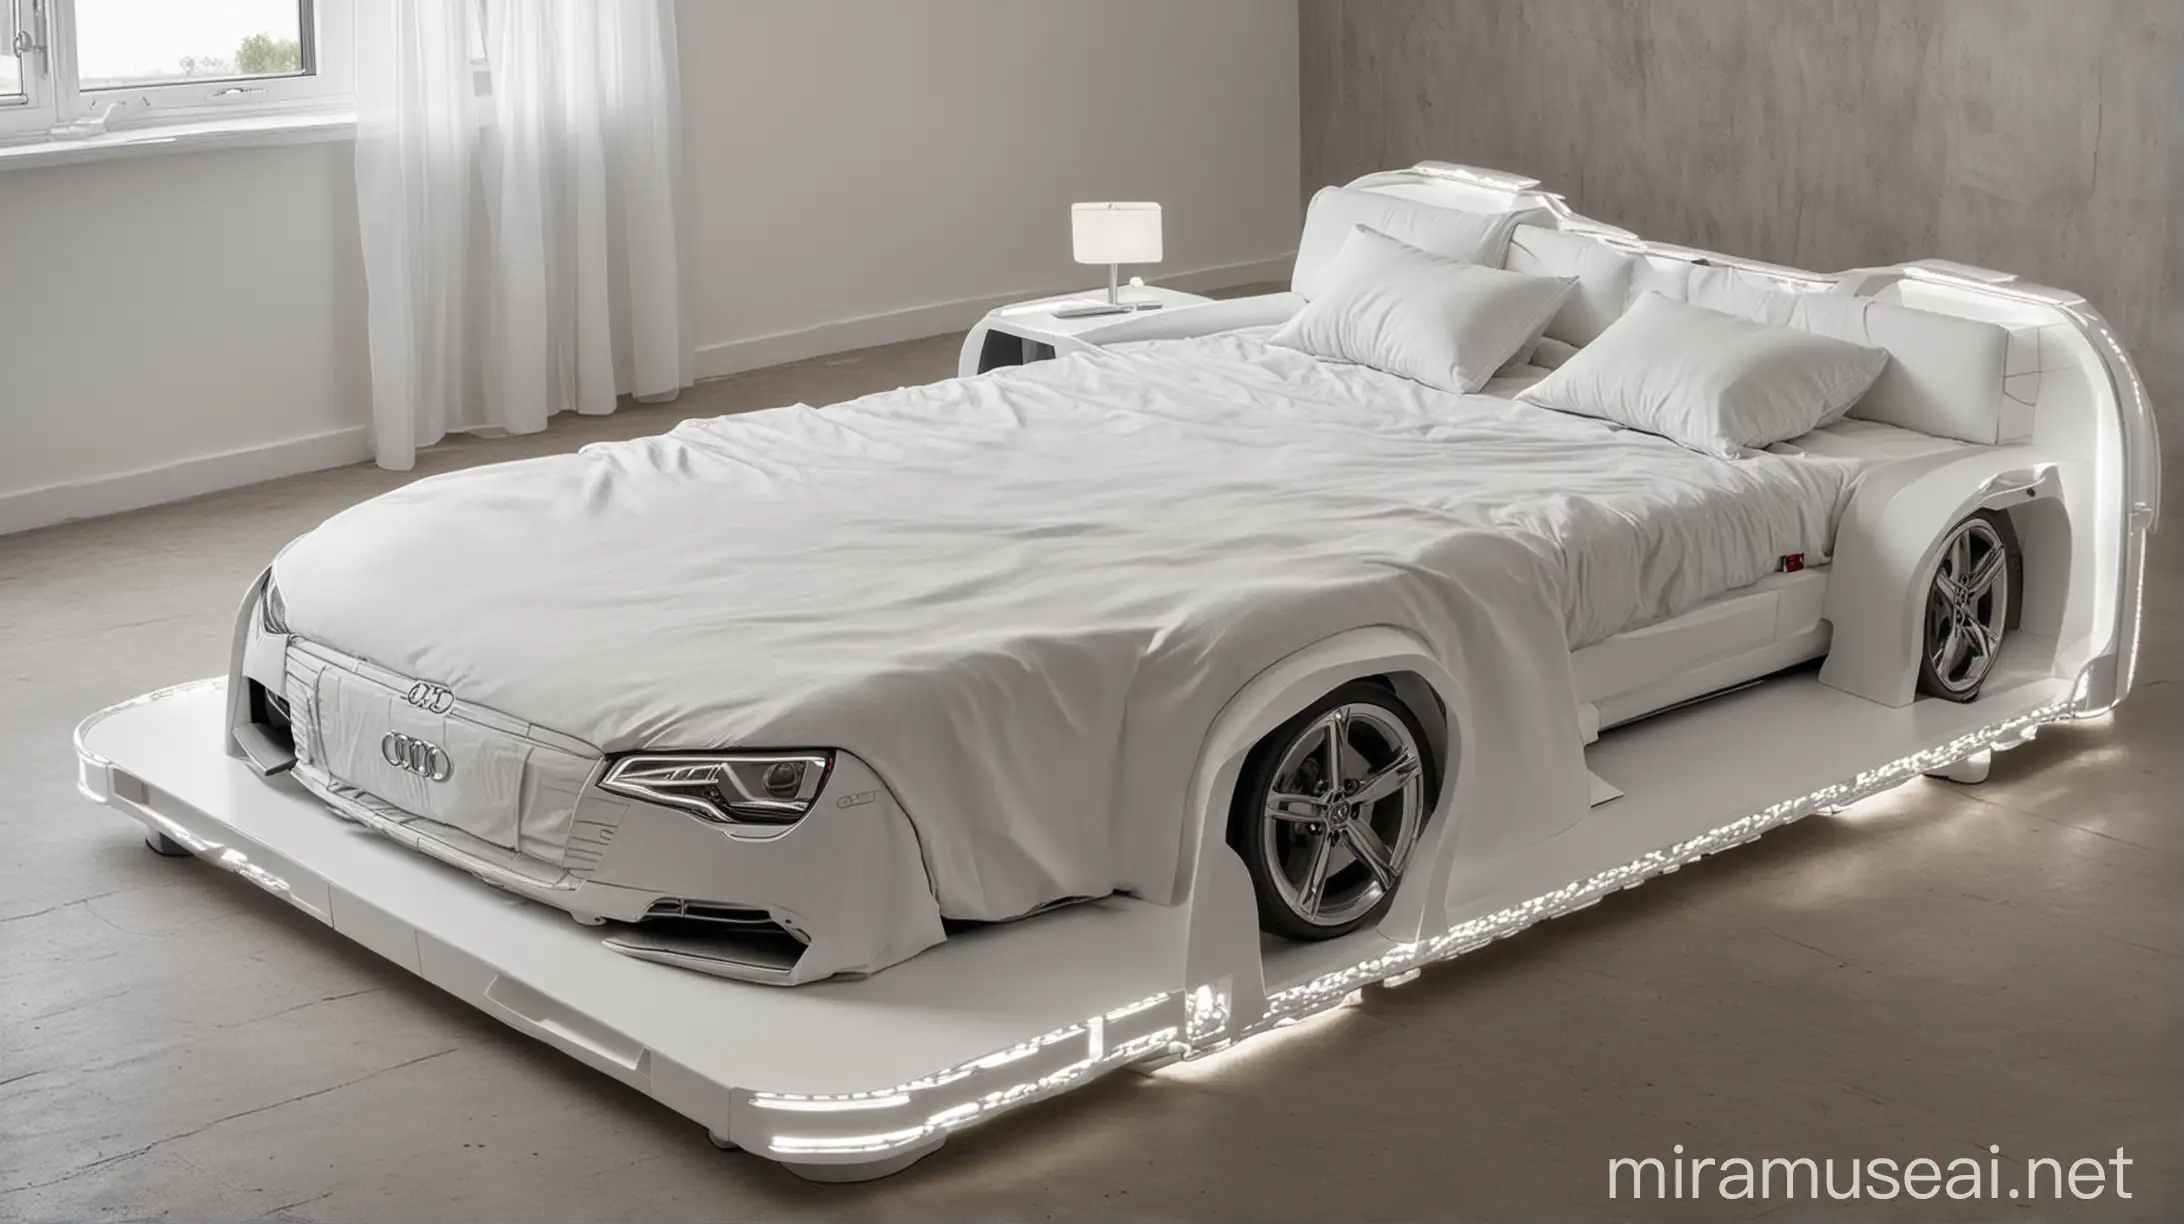 A double bed in the shape of a audi car.